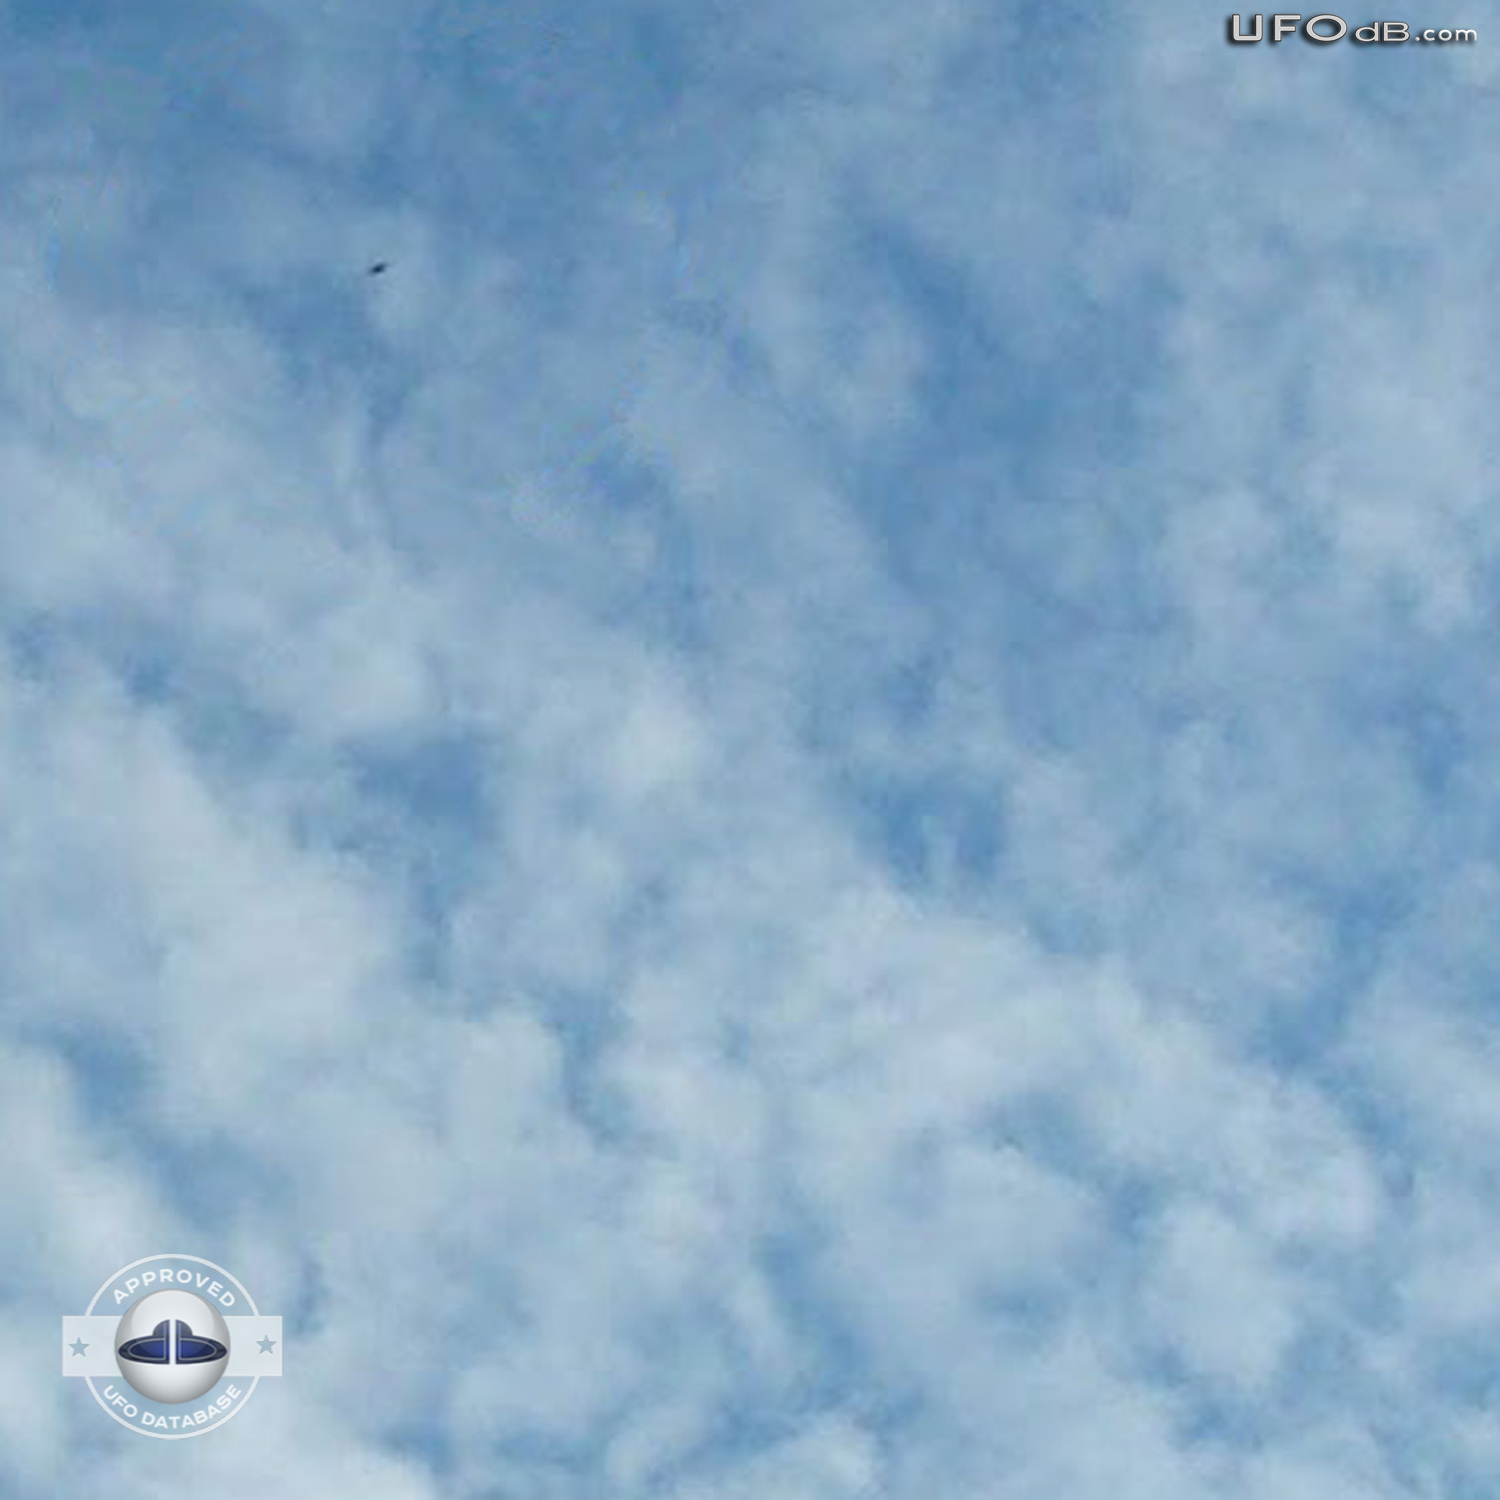 Three months of massive UFO sightings in Argentina | February 20 2011 UFO Picture #267-2